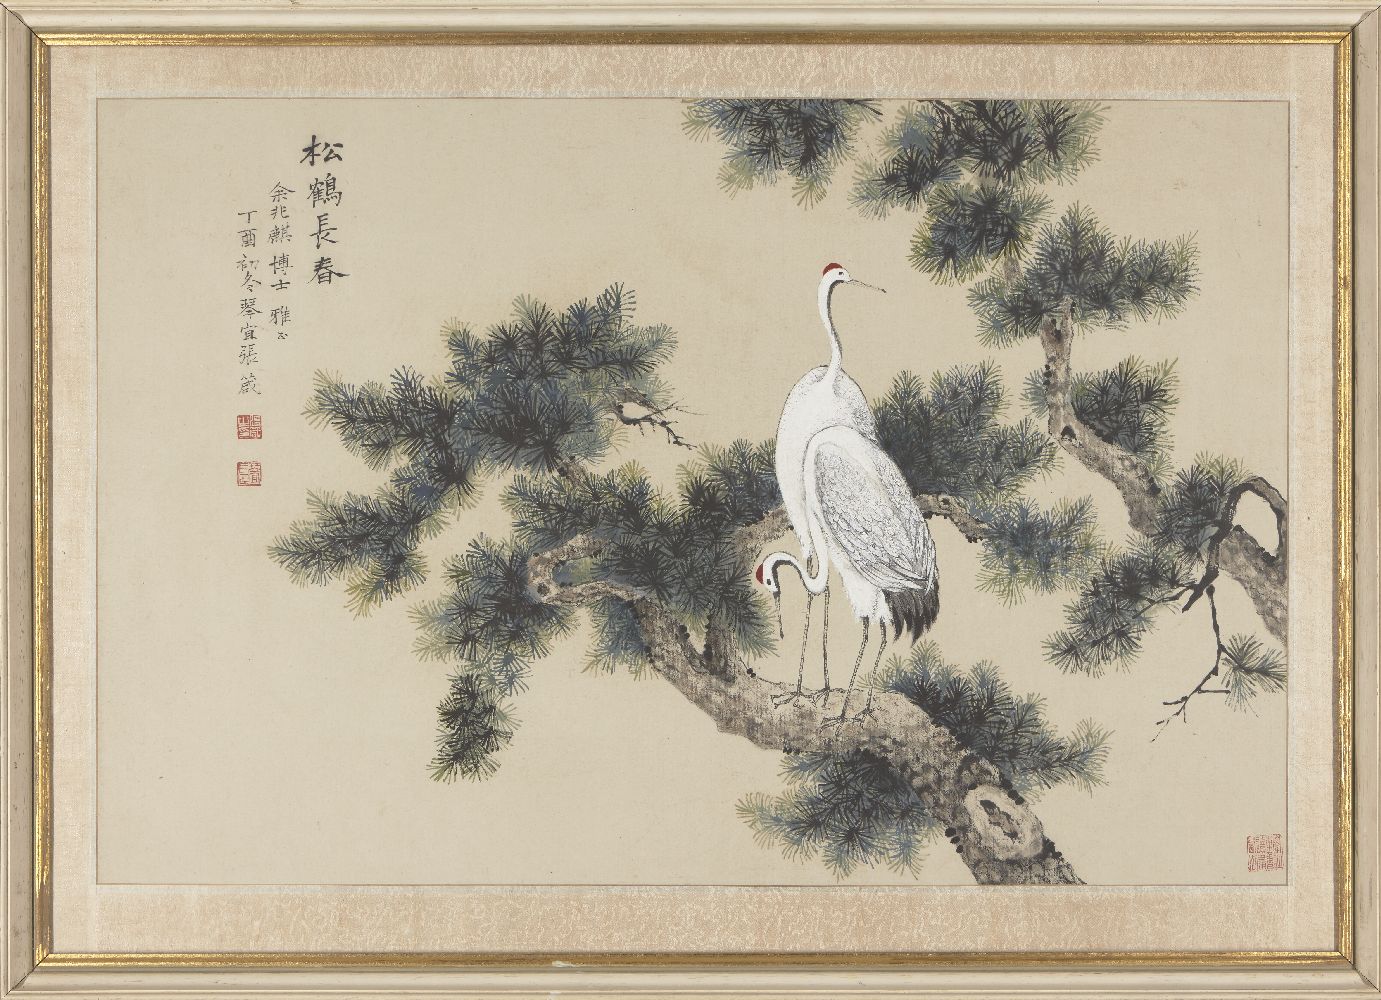 ZHANG ZHEN (Chinese, 20th century), ink and colour on paper, study of two cranes perched atop a pine - Image 2 of 2